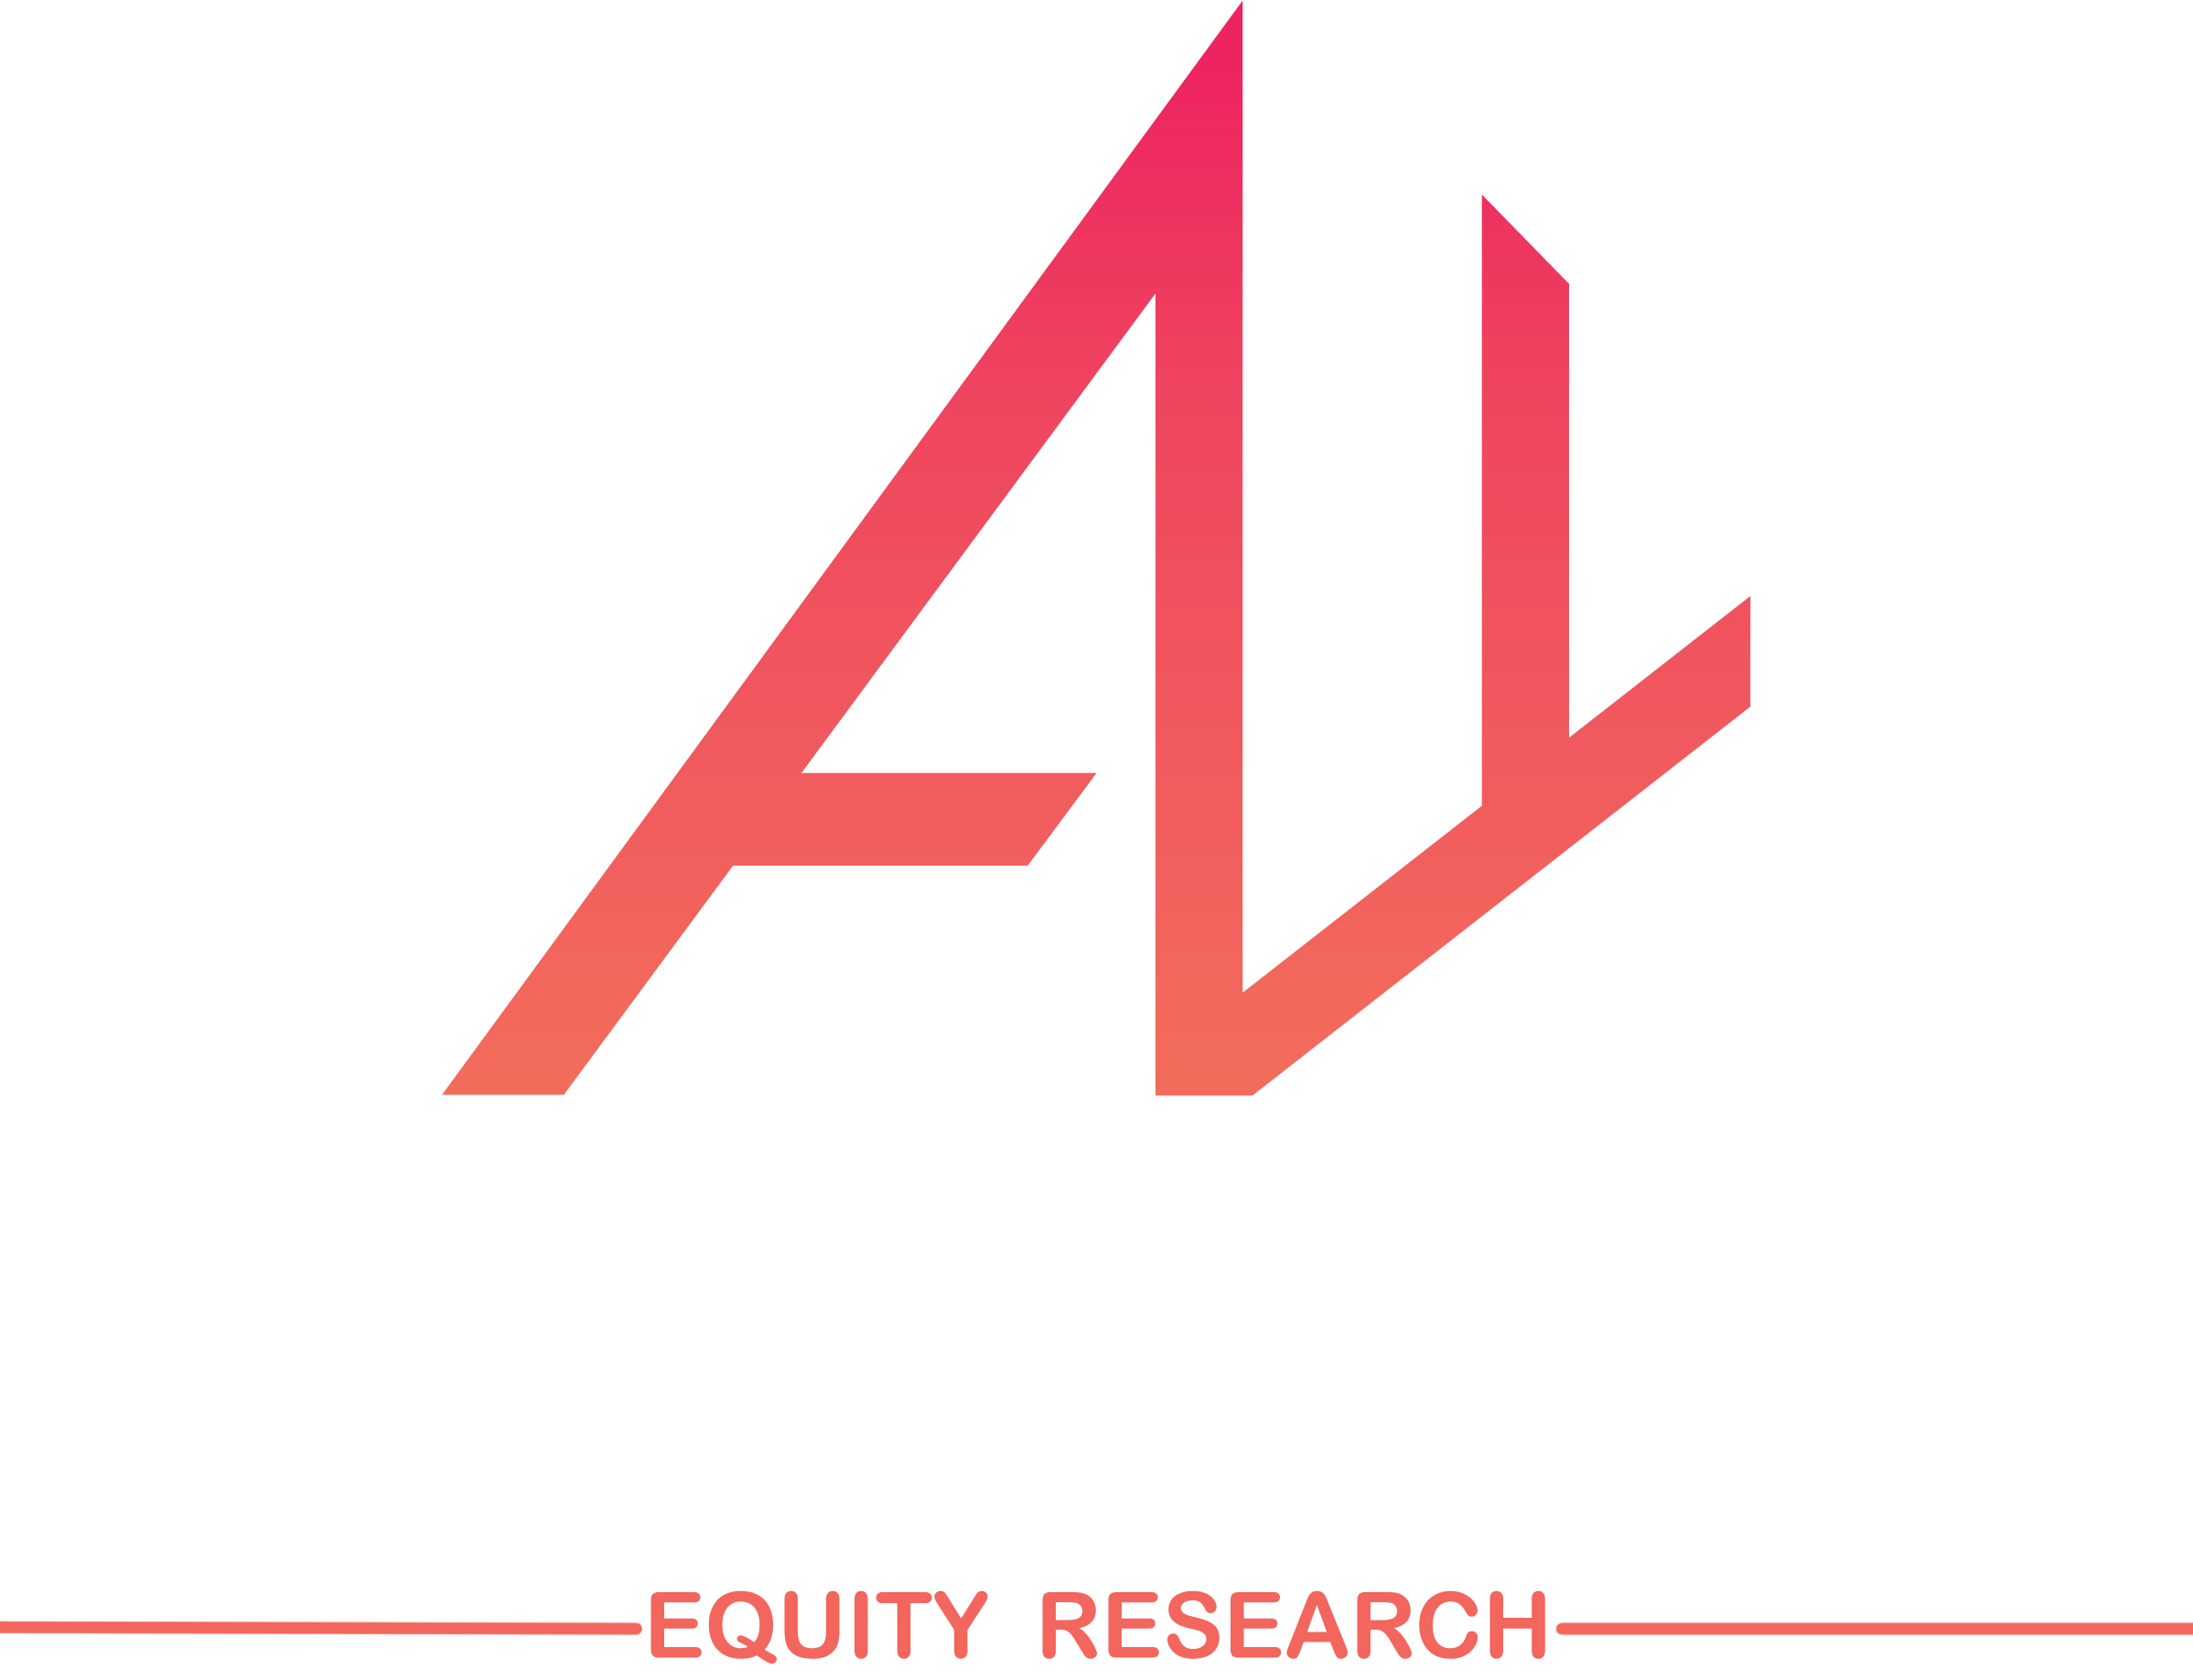 Alliance Equity Research | Global company-sponsored and independent equity research